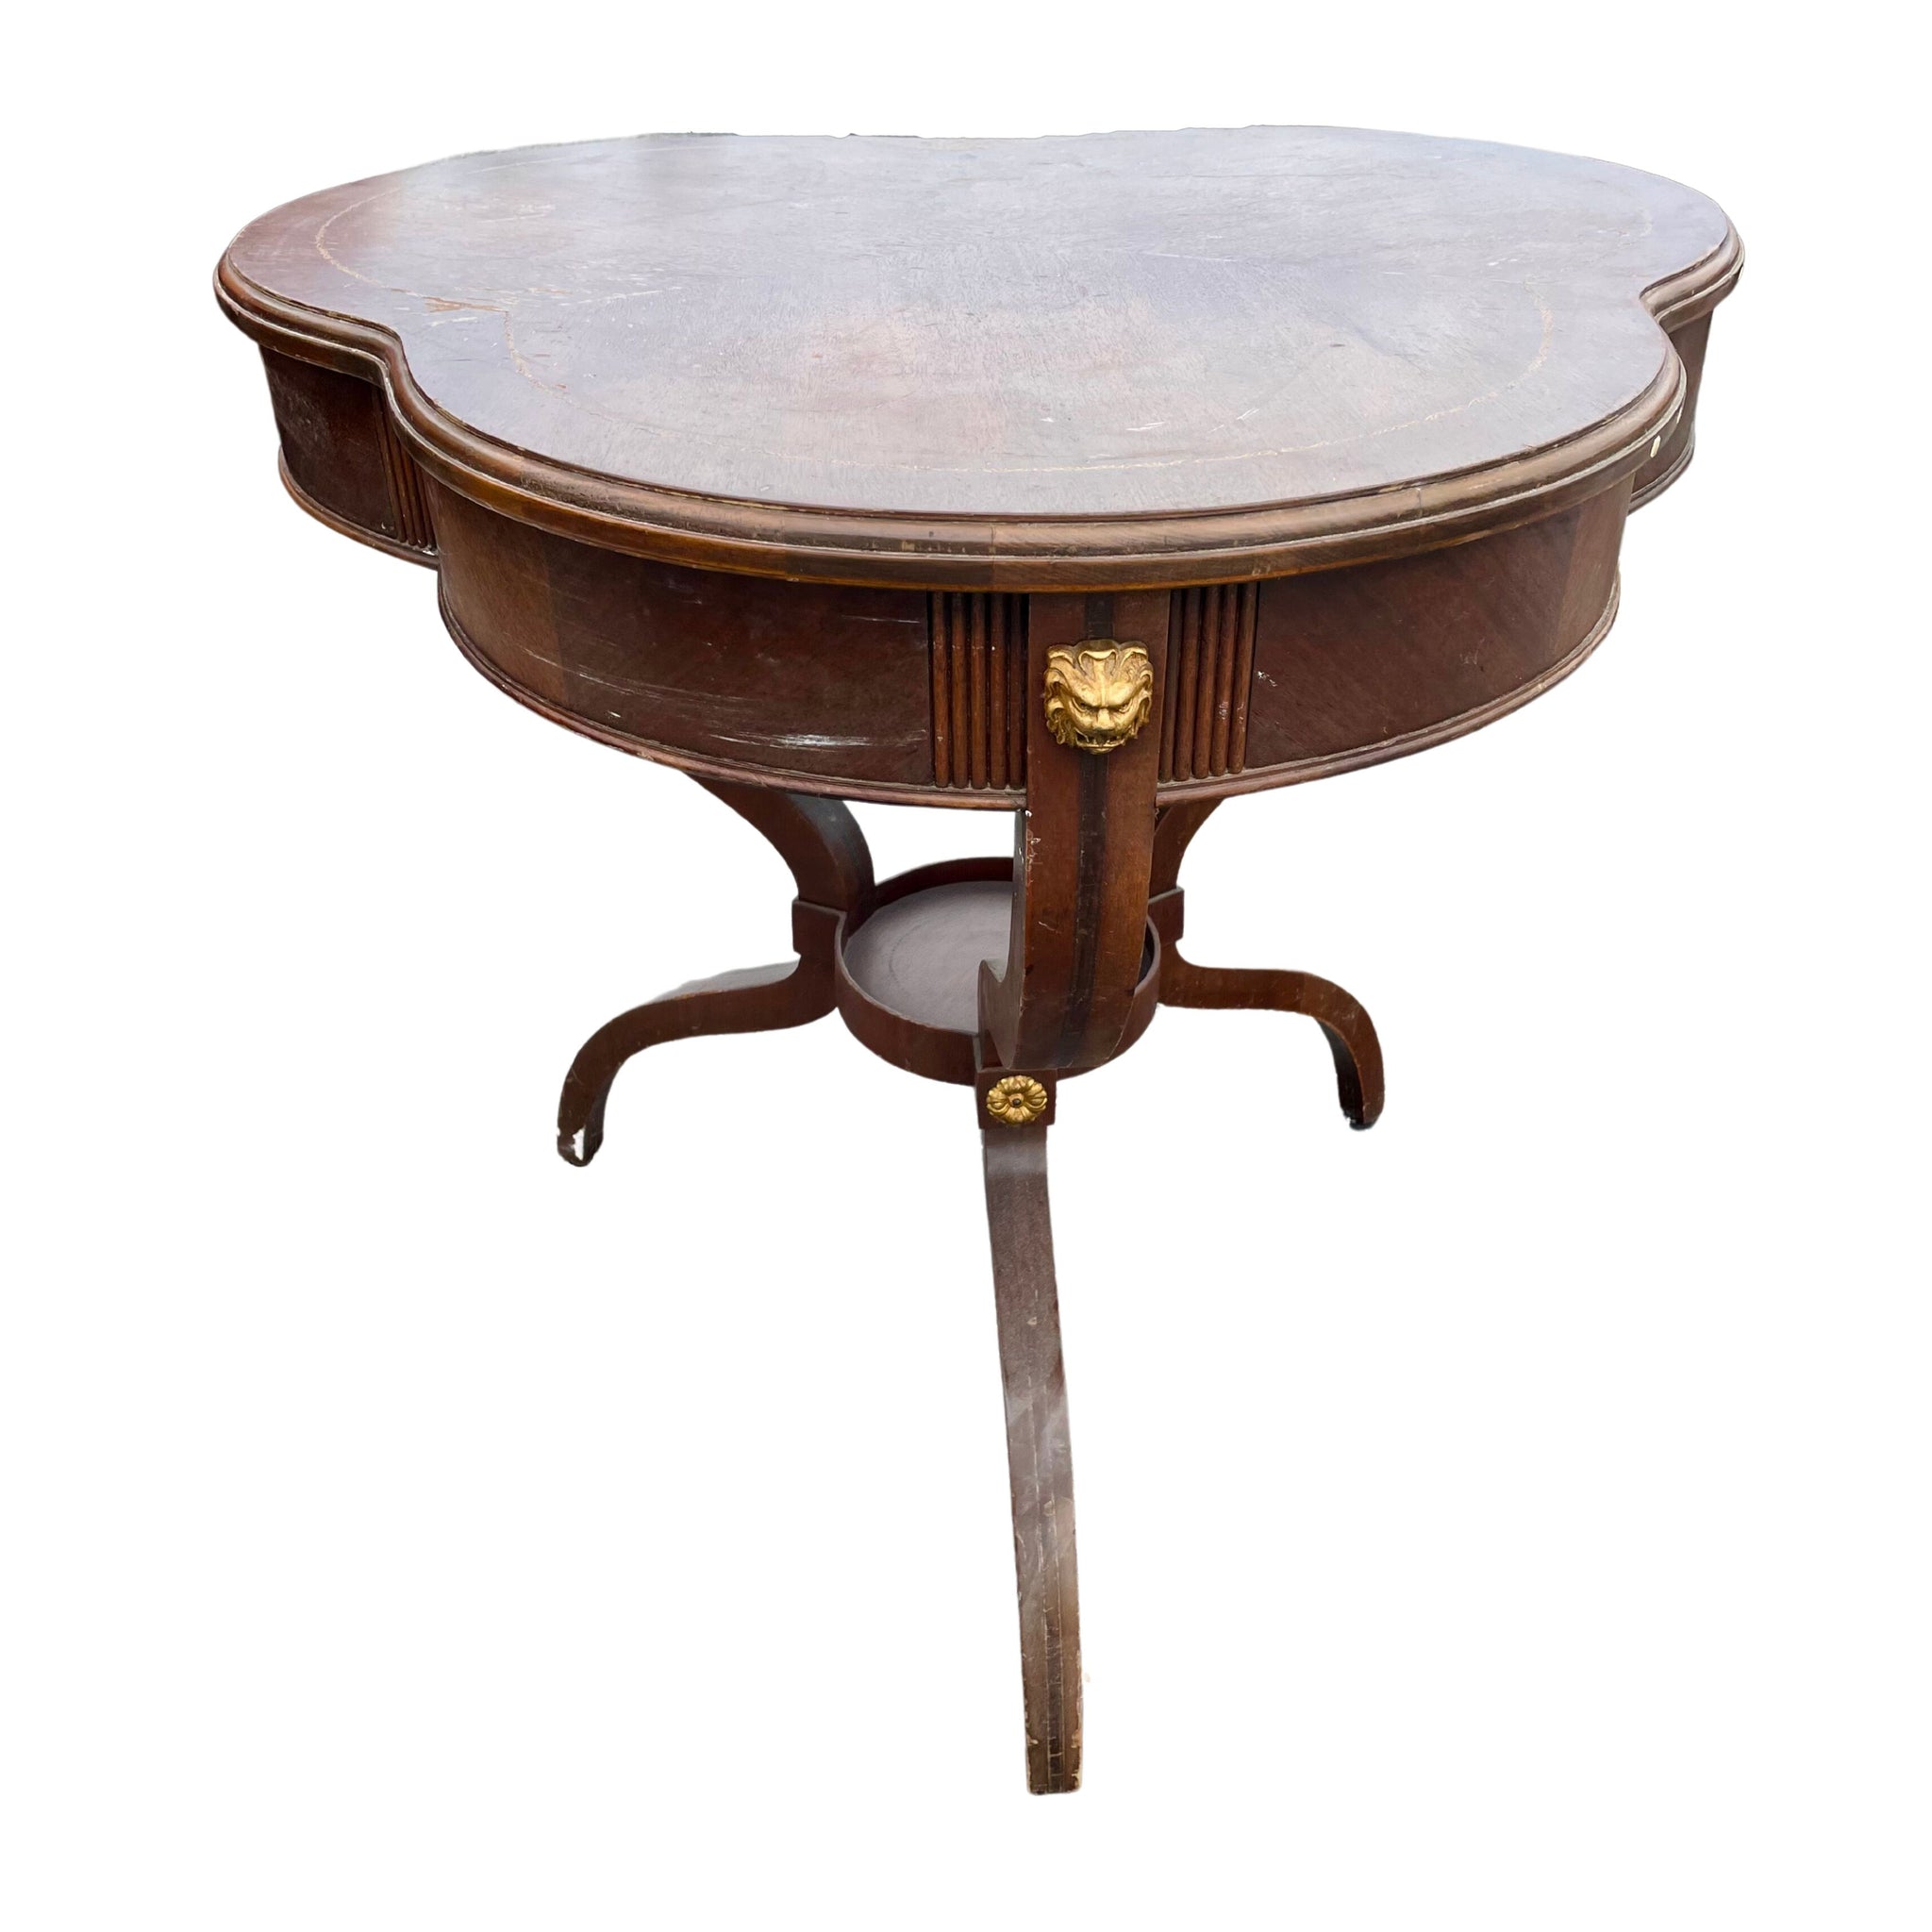 Vintage Mahogany Scalloped Drum Table Available for Custom Lacquer